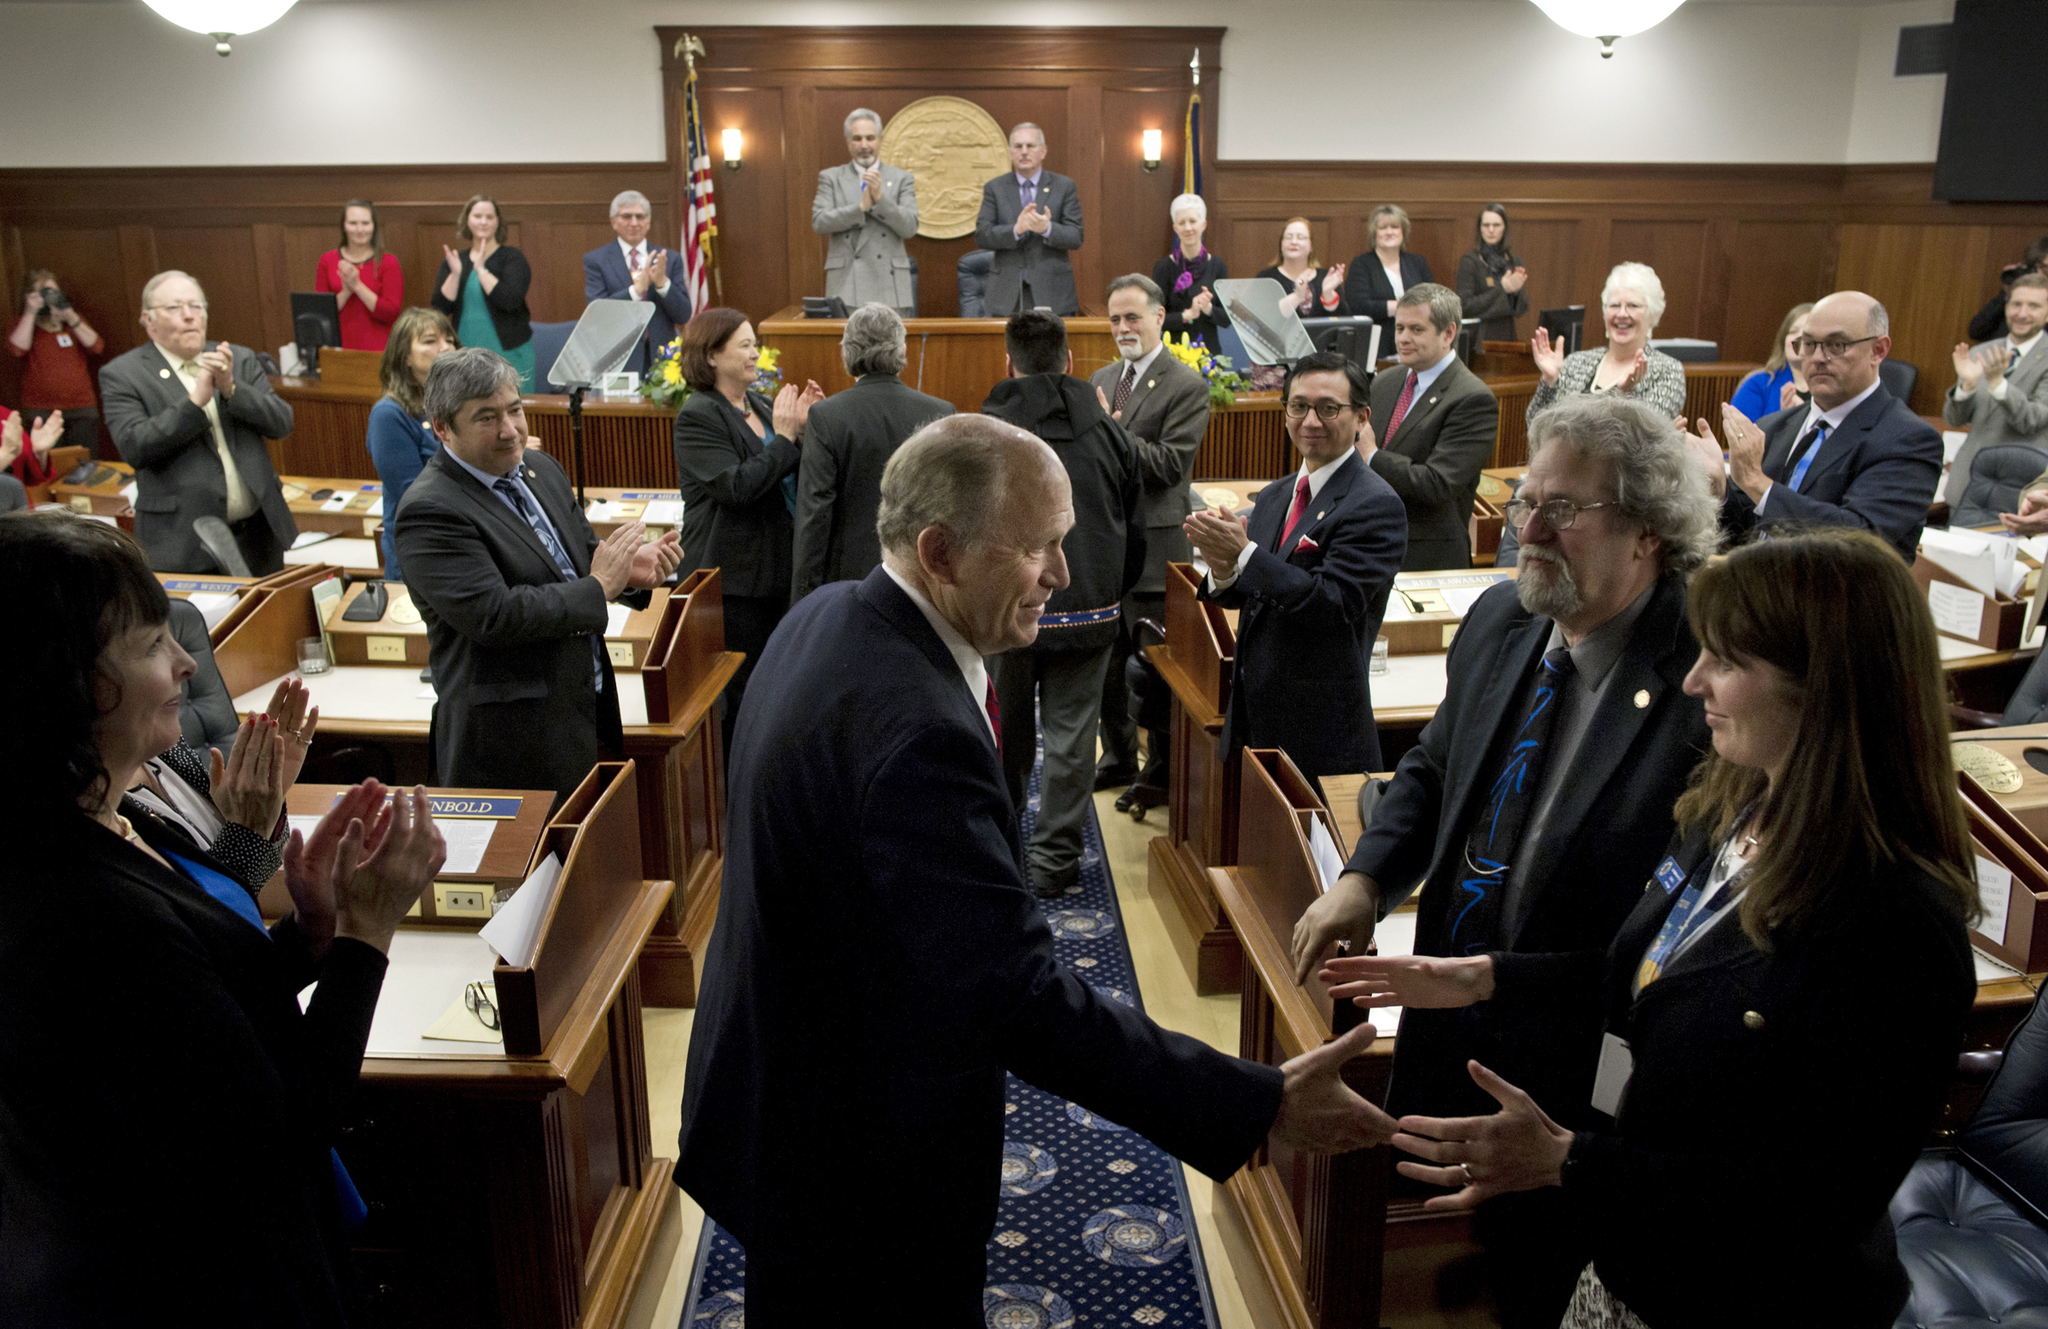 Gov. Bill Walker shakes hands with legislators as he enters the House chamber for his State of the State address on Jan. 18 before a joint session of the Alaska Legislature at the Capitol. Senate President Pete Kelly, R-Fairbanks, left, and Speaker of the House Bryce Edgmon, D-Dillingham, watch from the Speakers desk in the background. (Michael Penn | Juneau Empire)